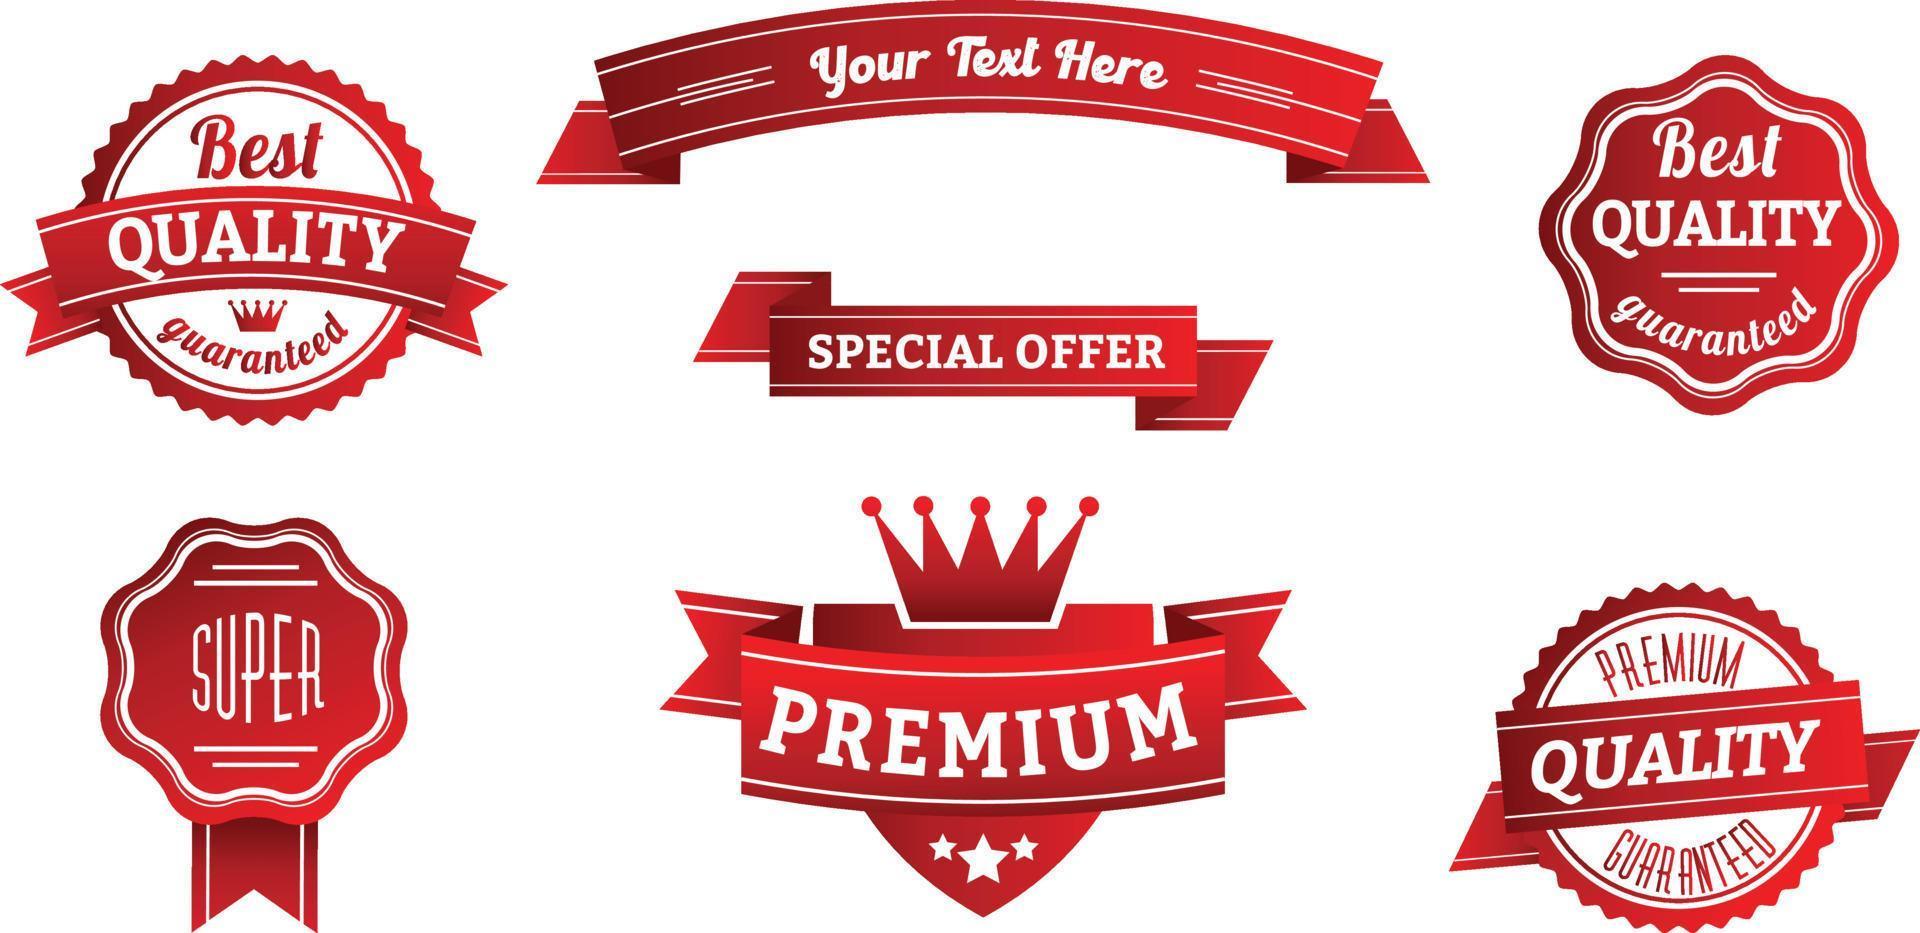 Best Seller Badge - Vectorjunky - Free Vectors, Icons, Logos and More